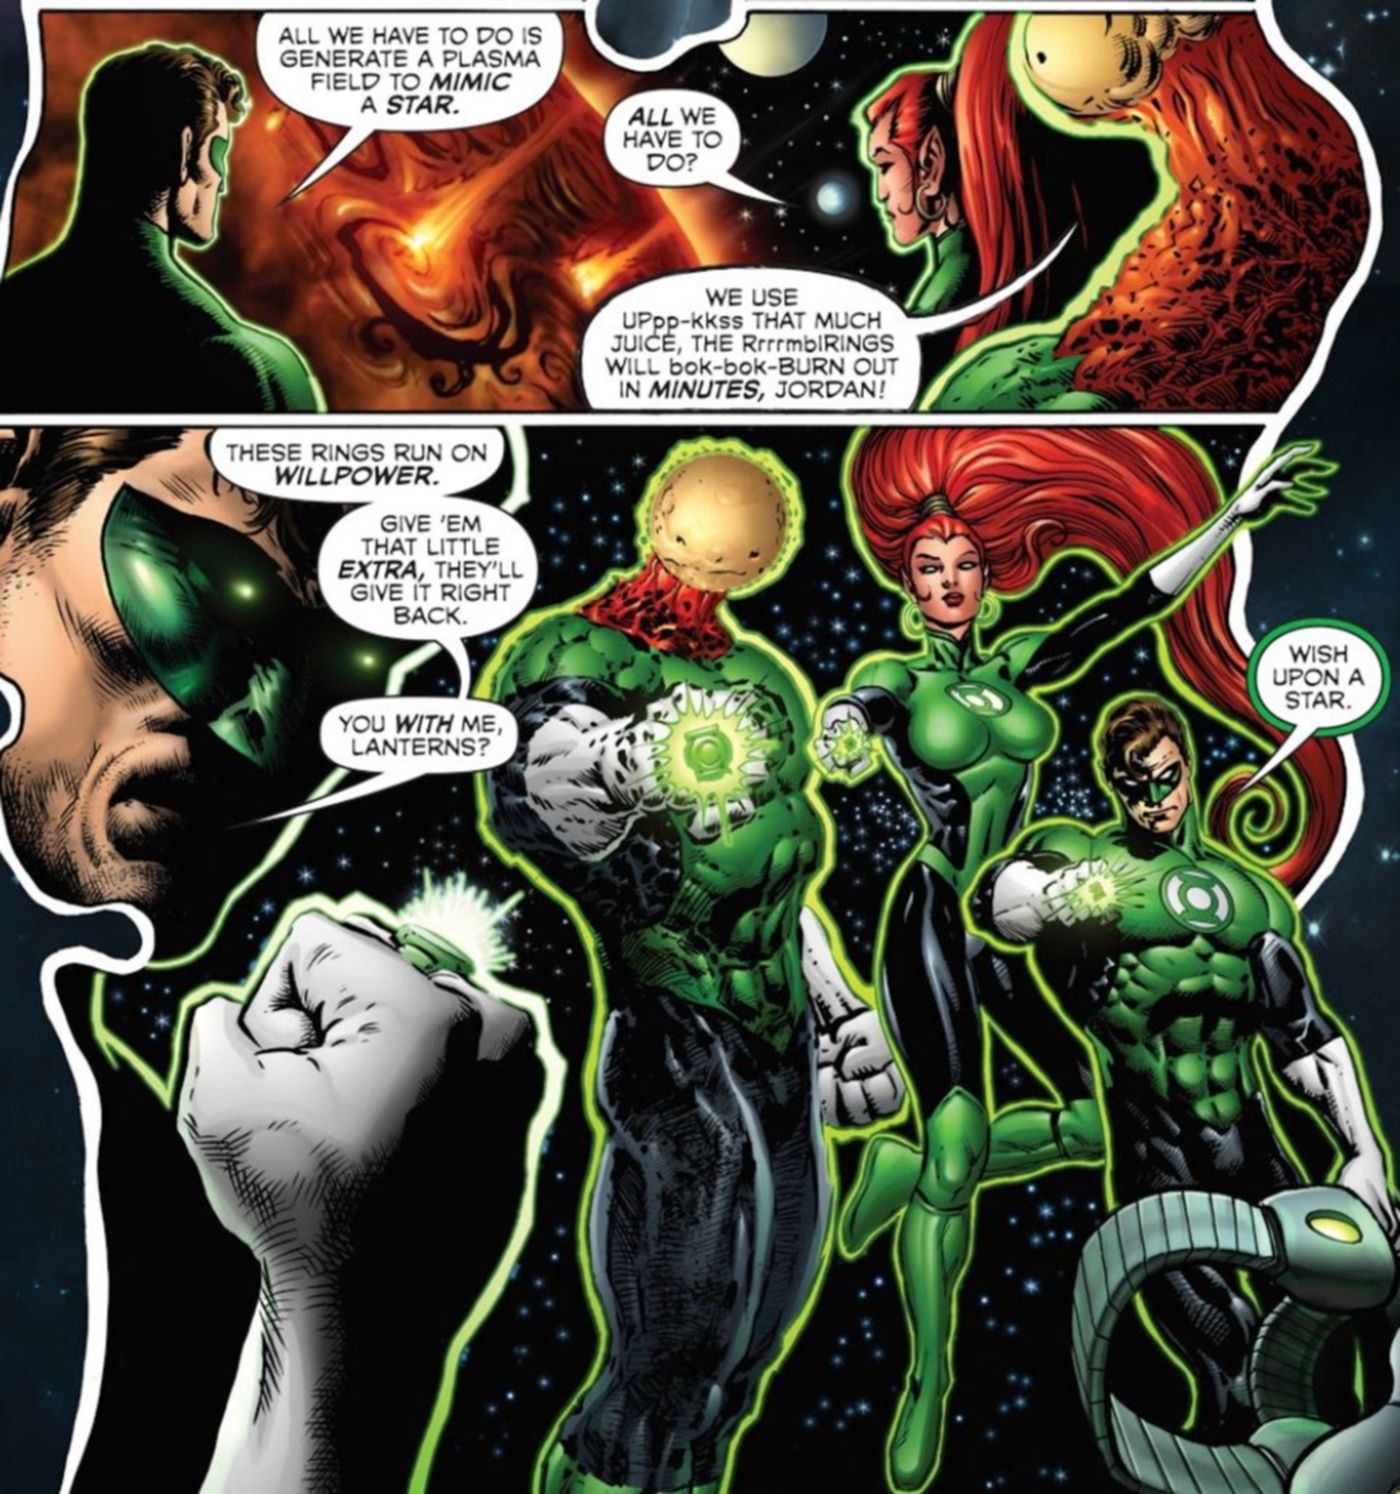 Green Lantern’s Ultimate Power Construct is a Superman-Killer